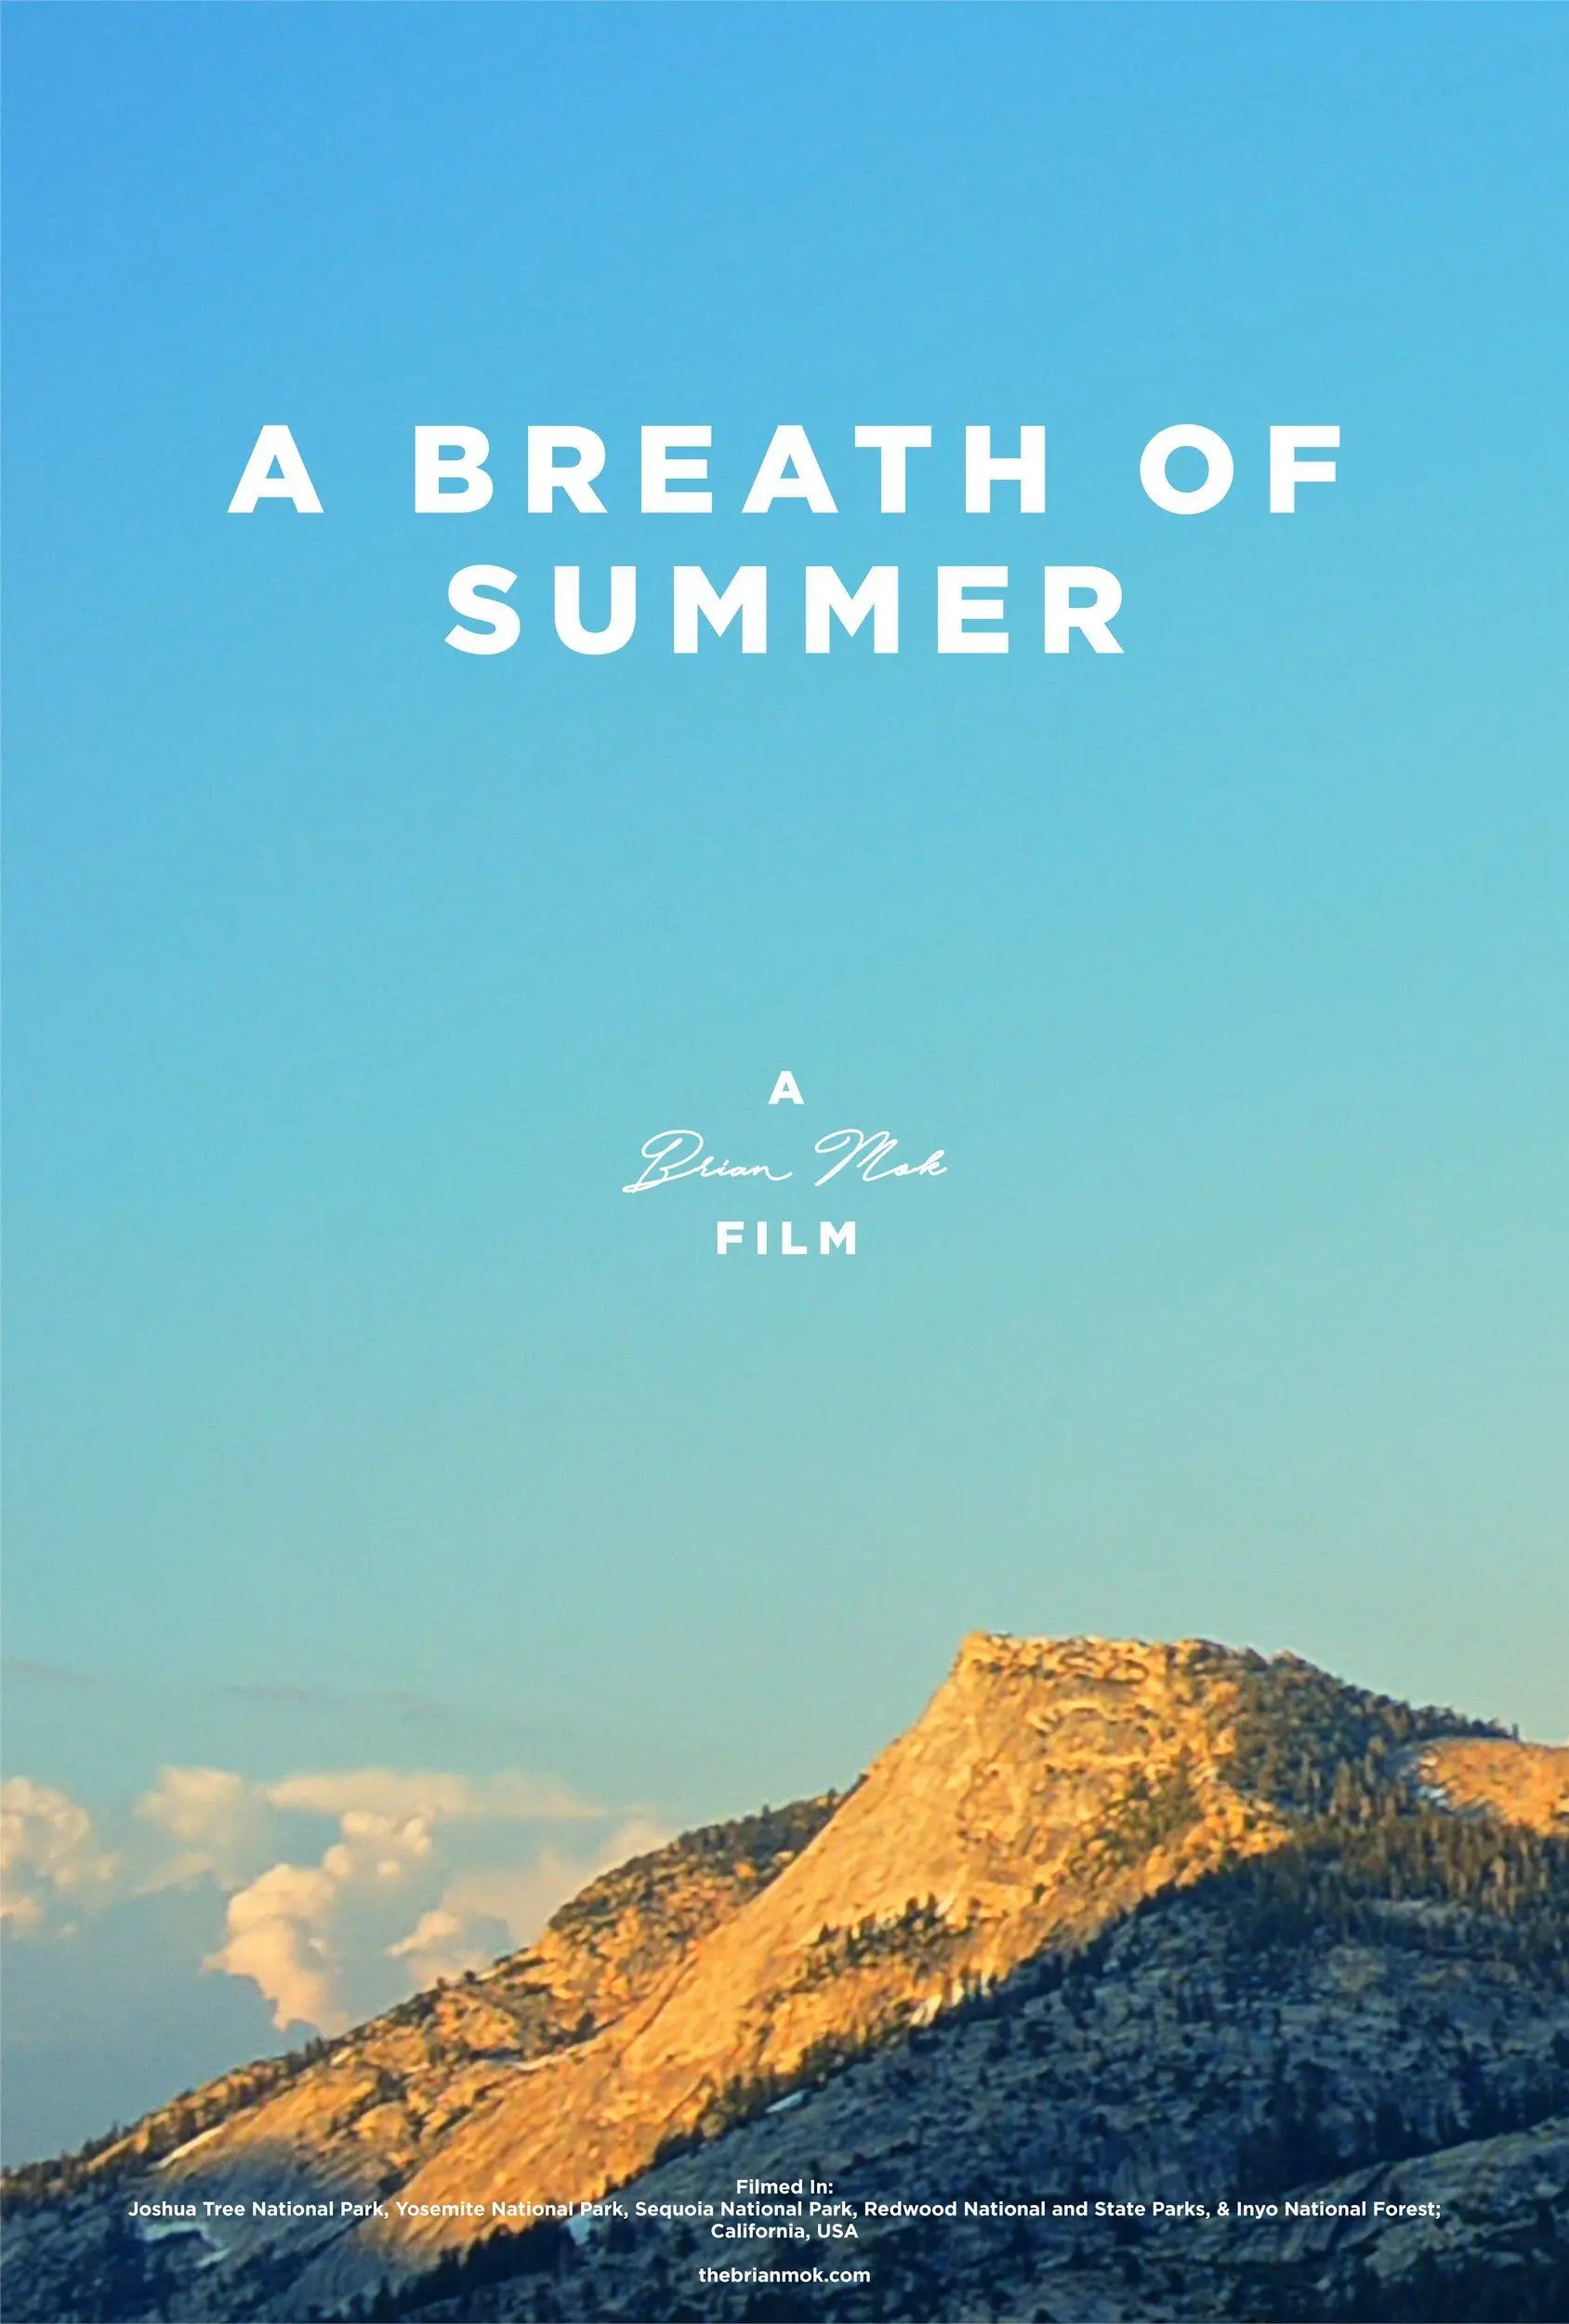 "A Breath of Summer" film poster. Golden hills under clear blue skies during sunset at Yosemite National Park.